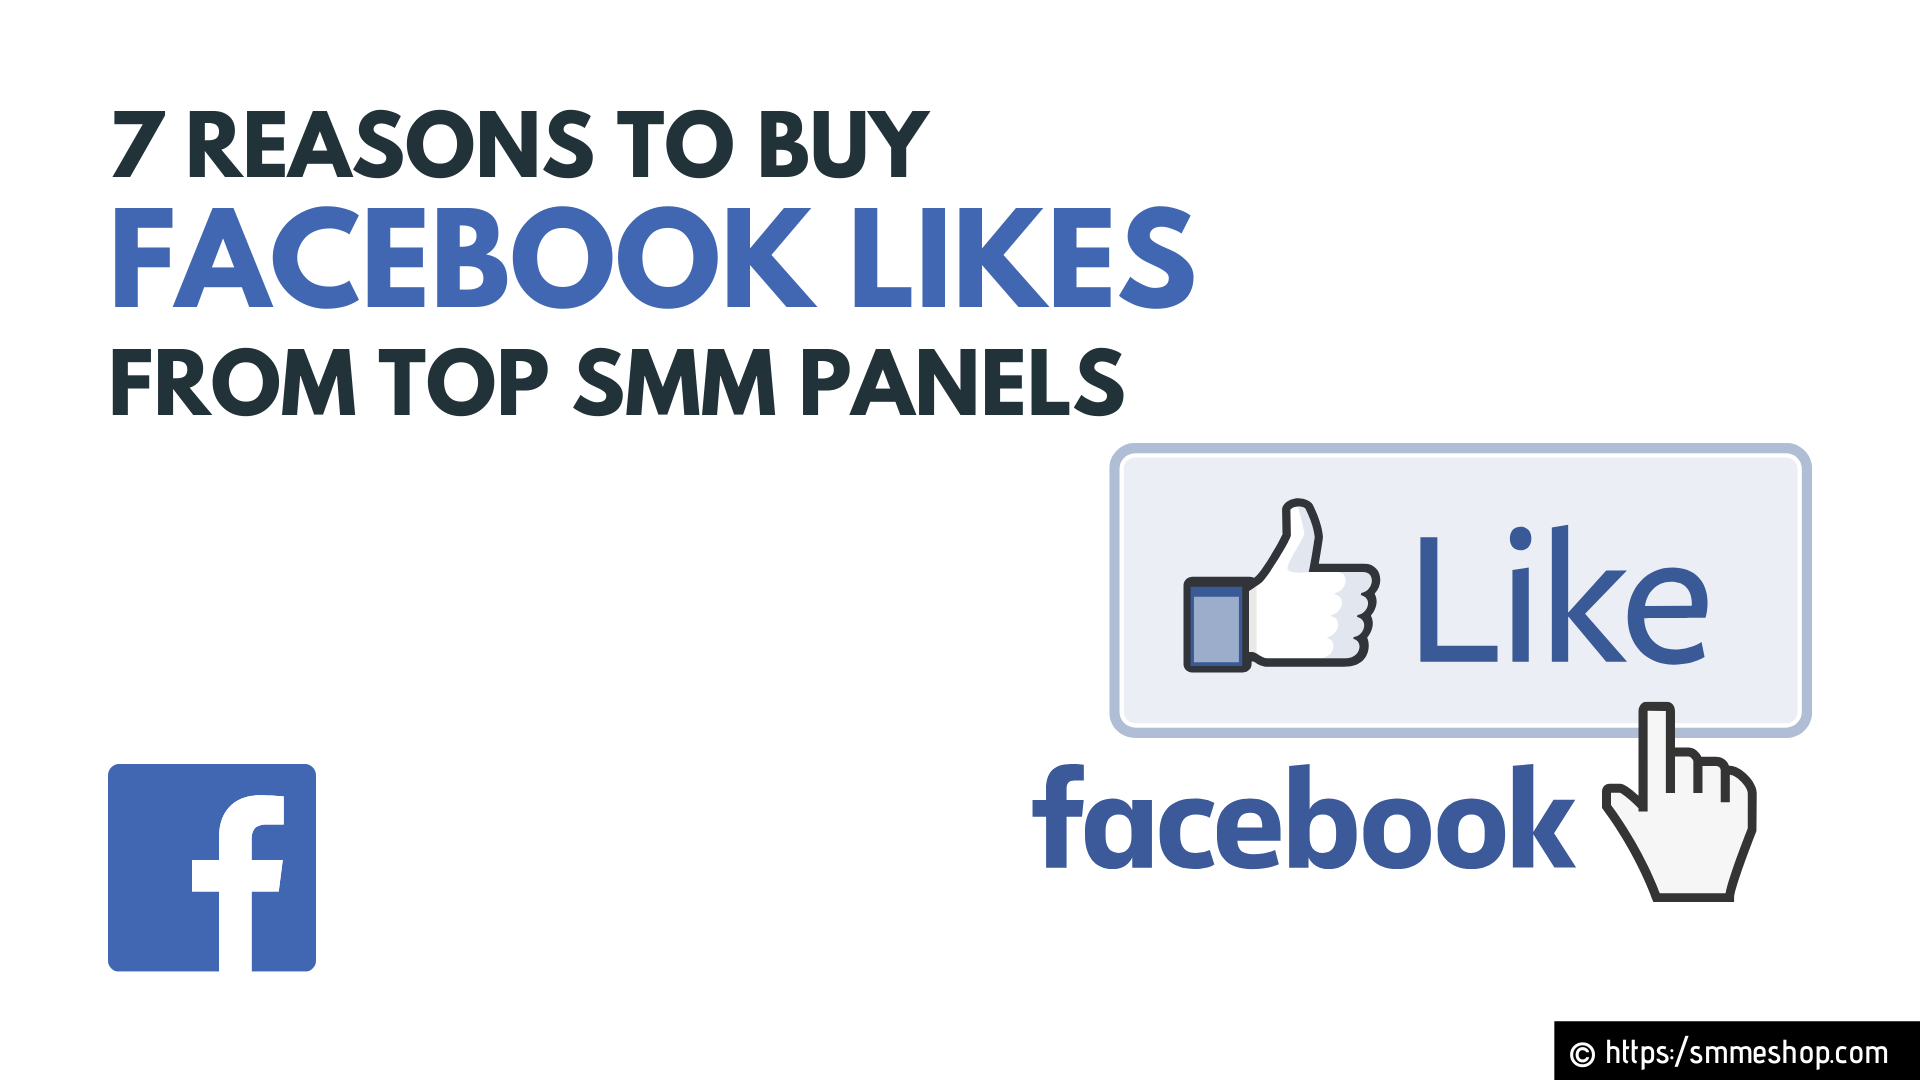 7 Reasons to Buy Facebook Likes from Top SMM Panels